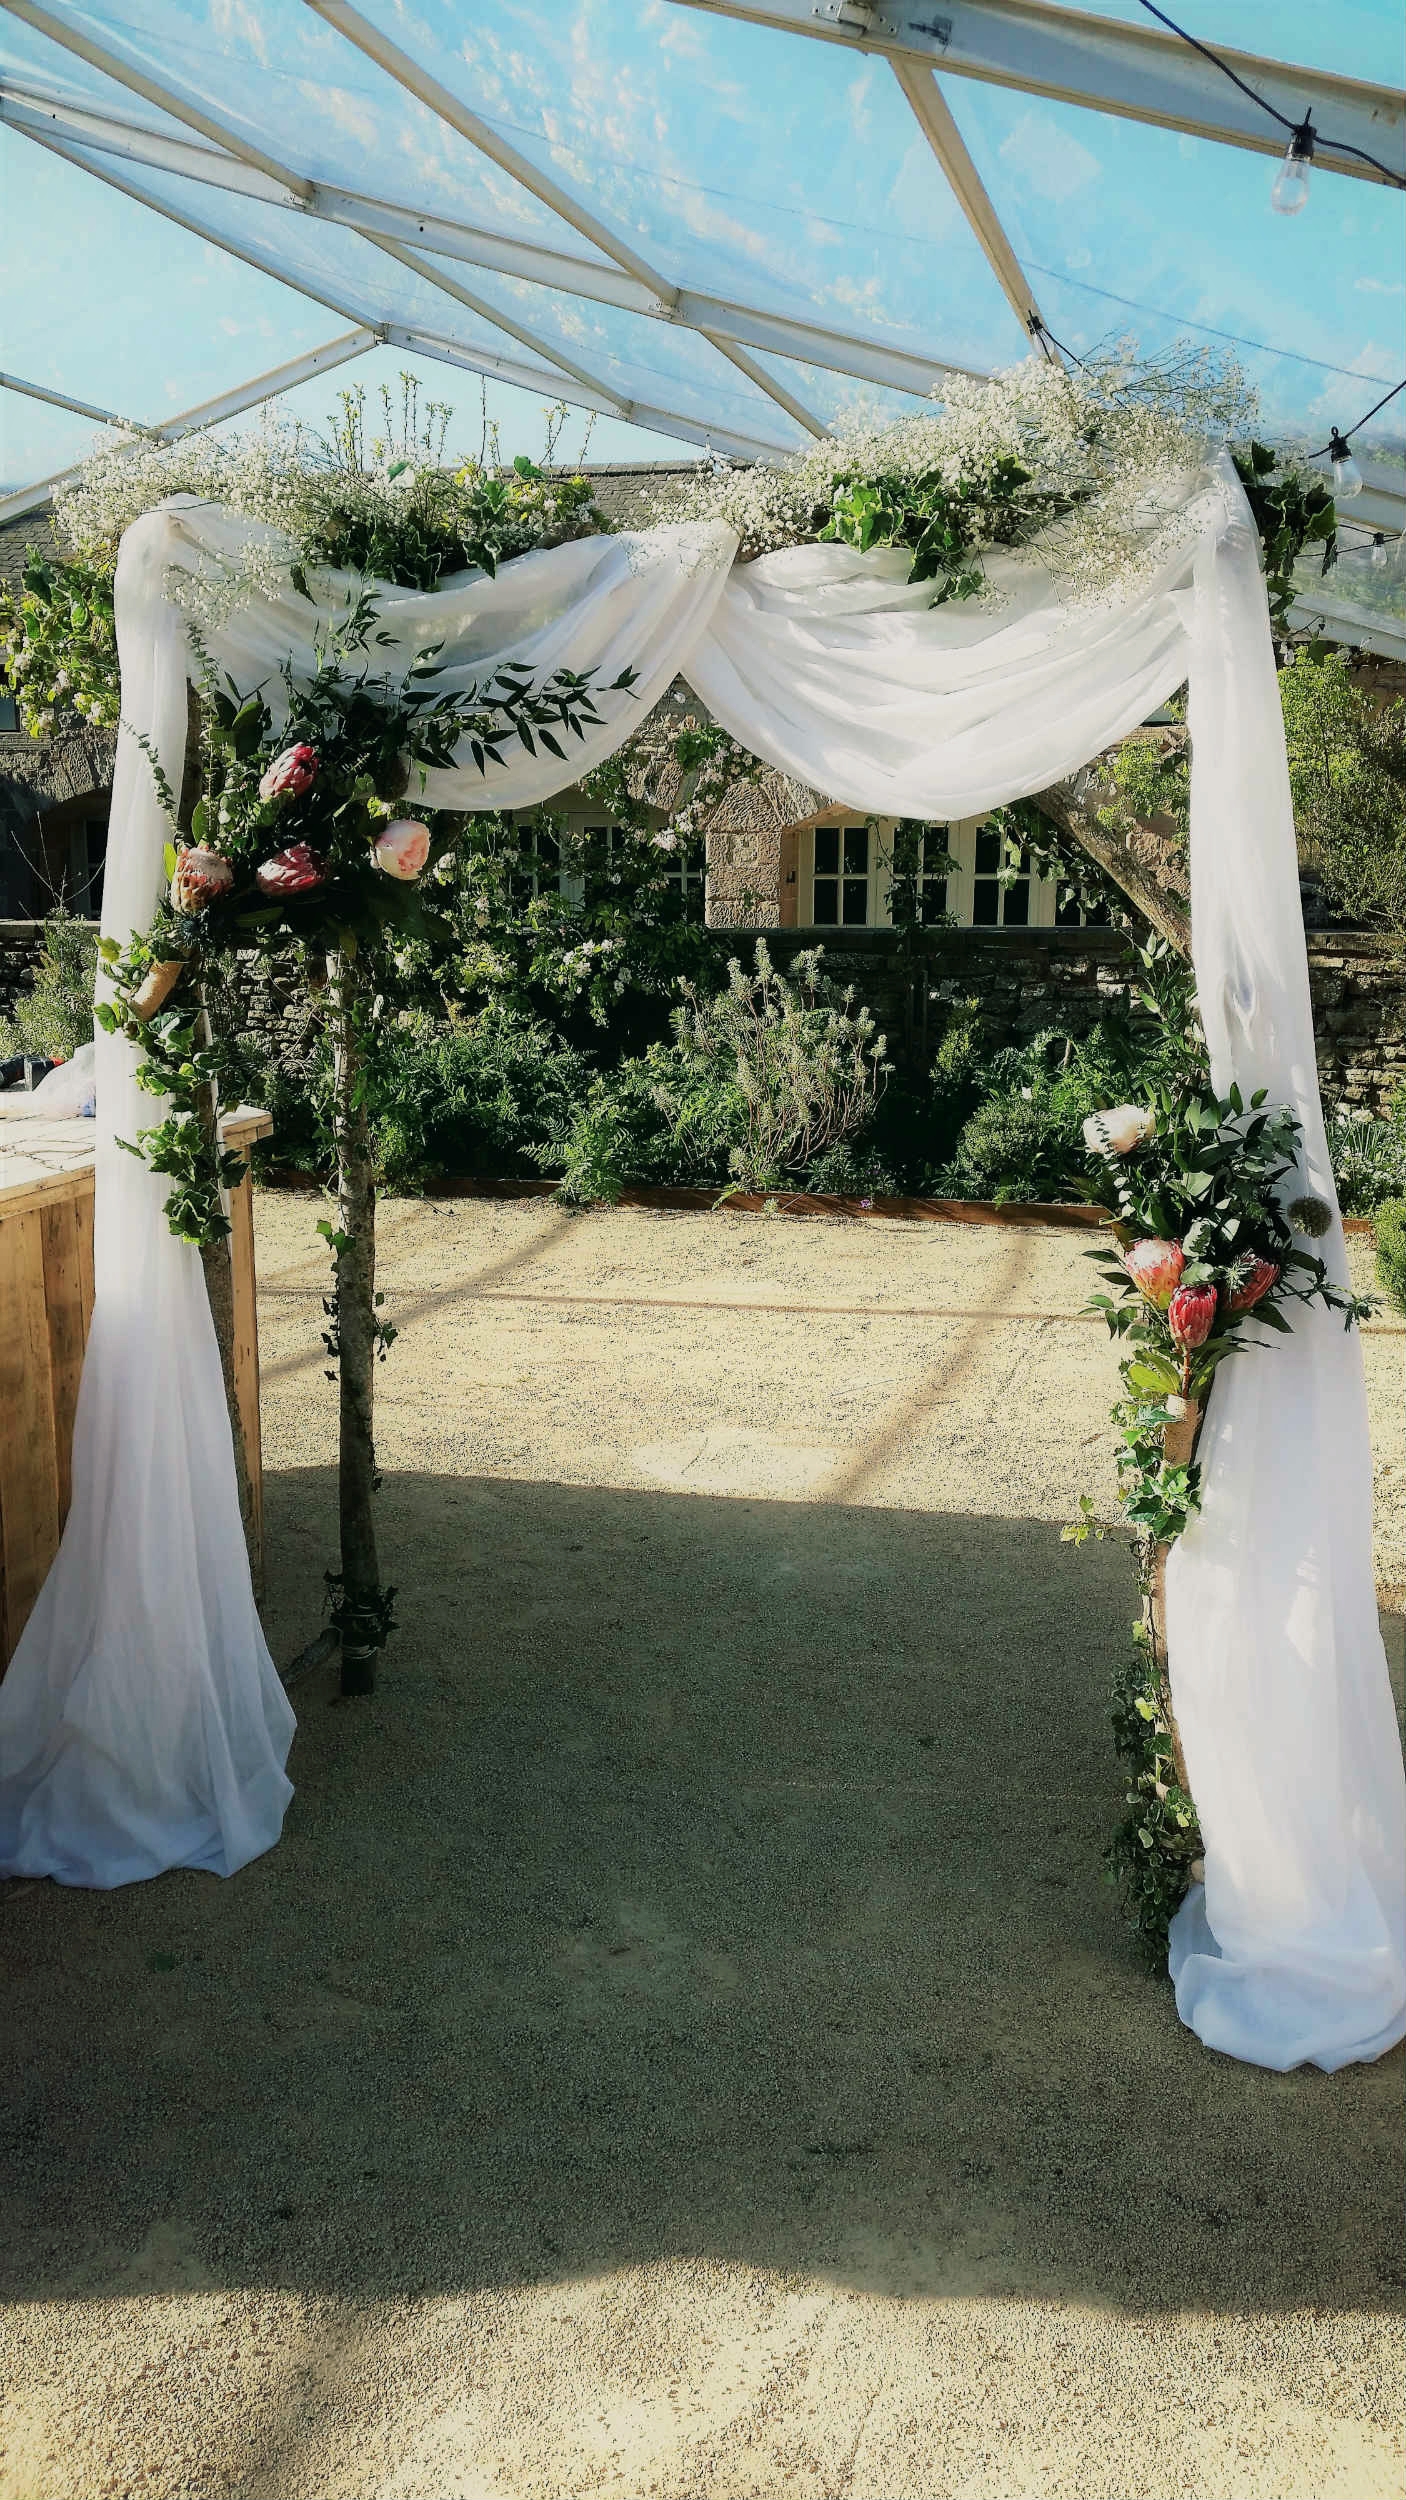 Copy of Copy of Rustic wedding arch hire styled